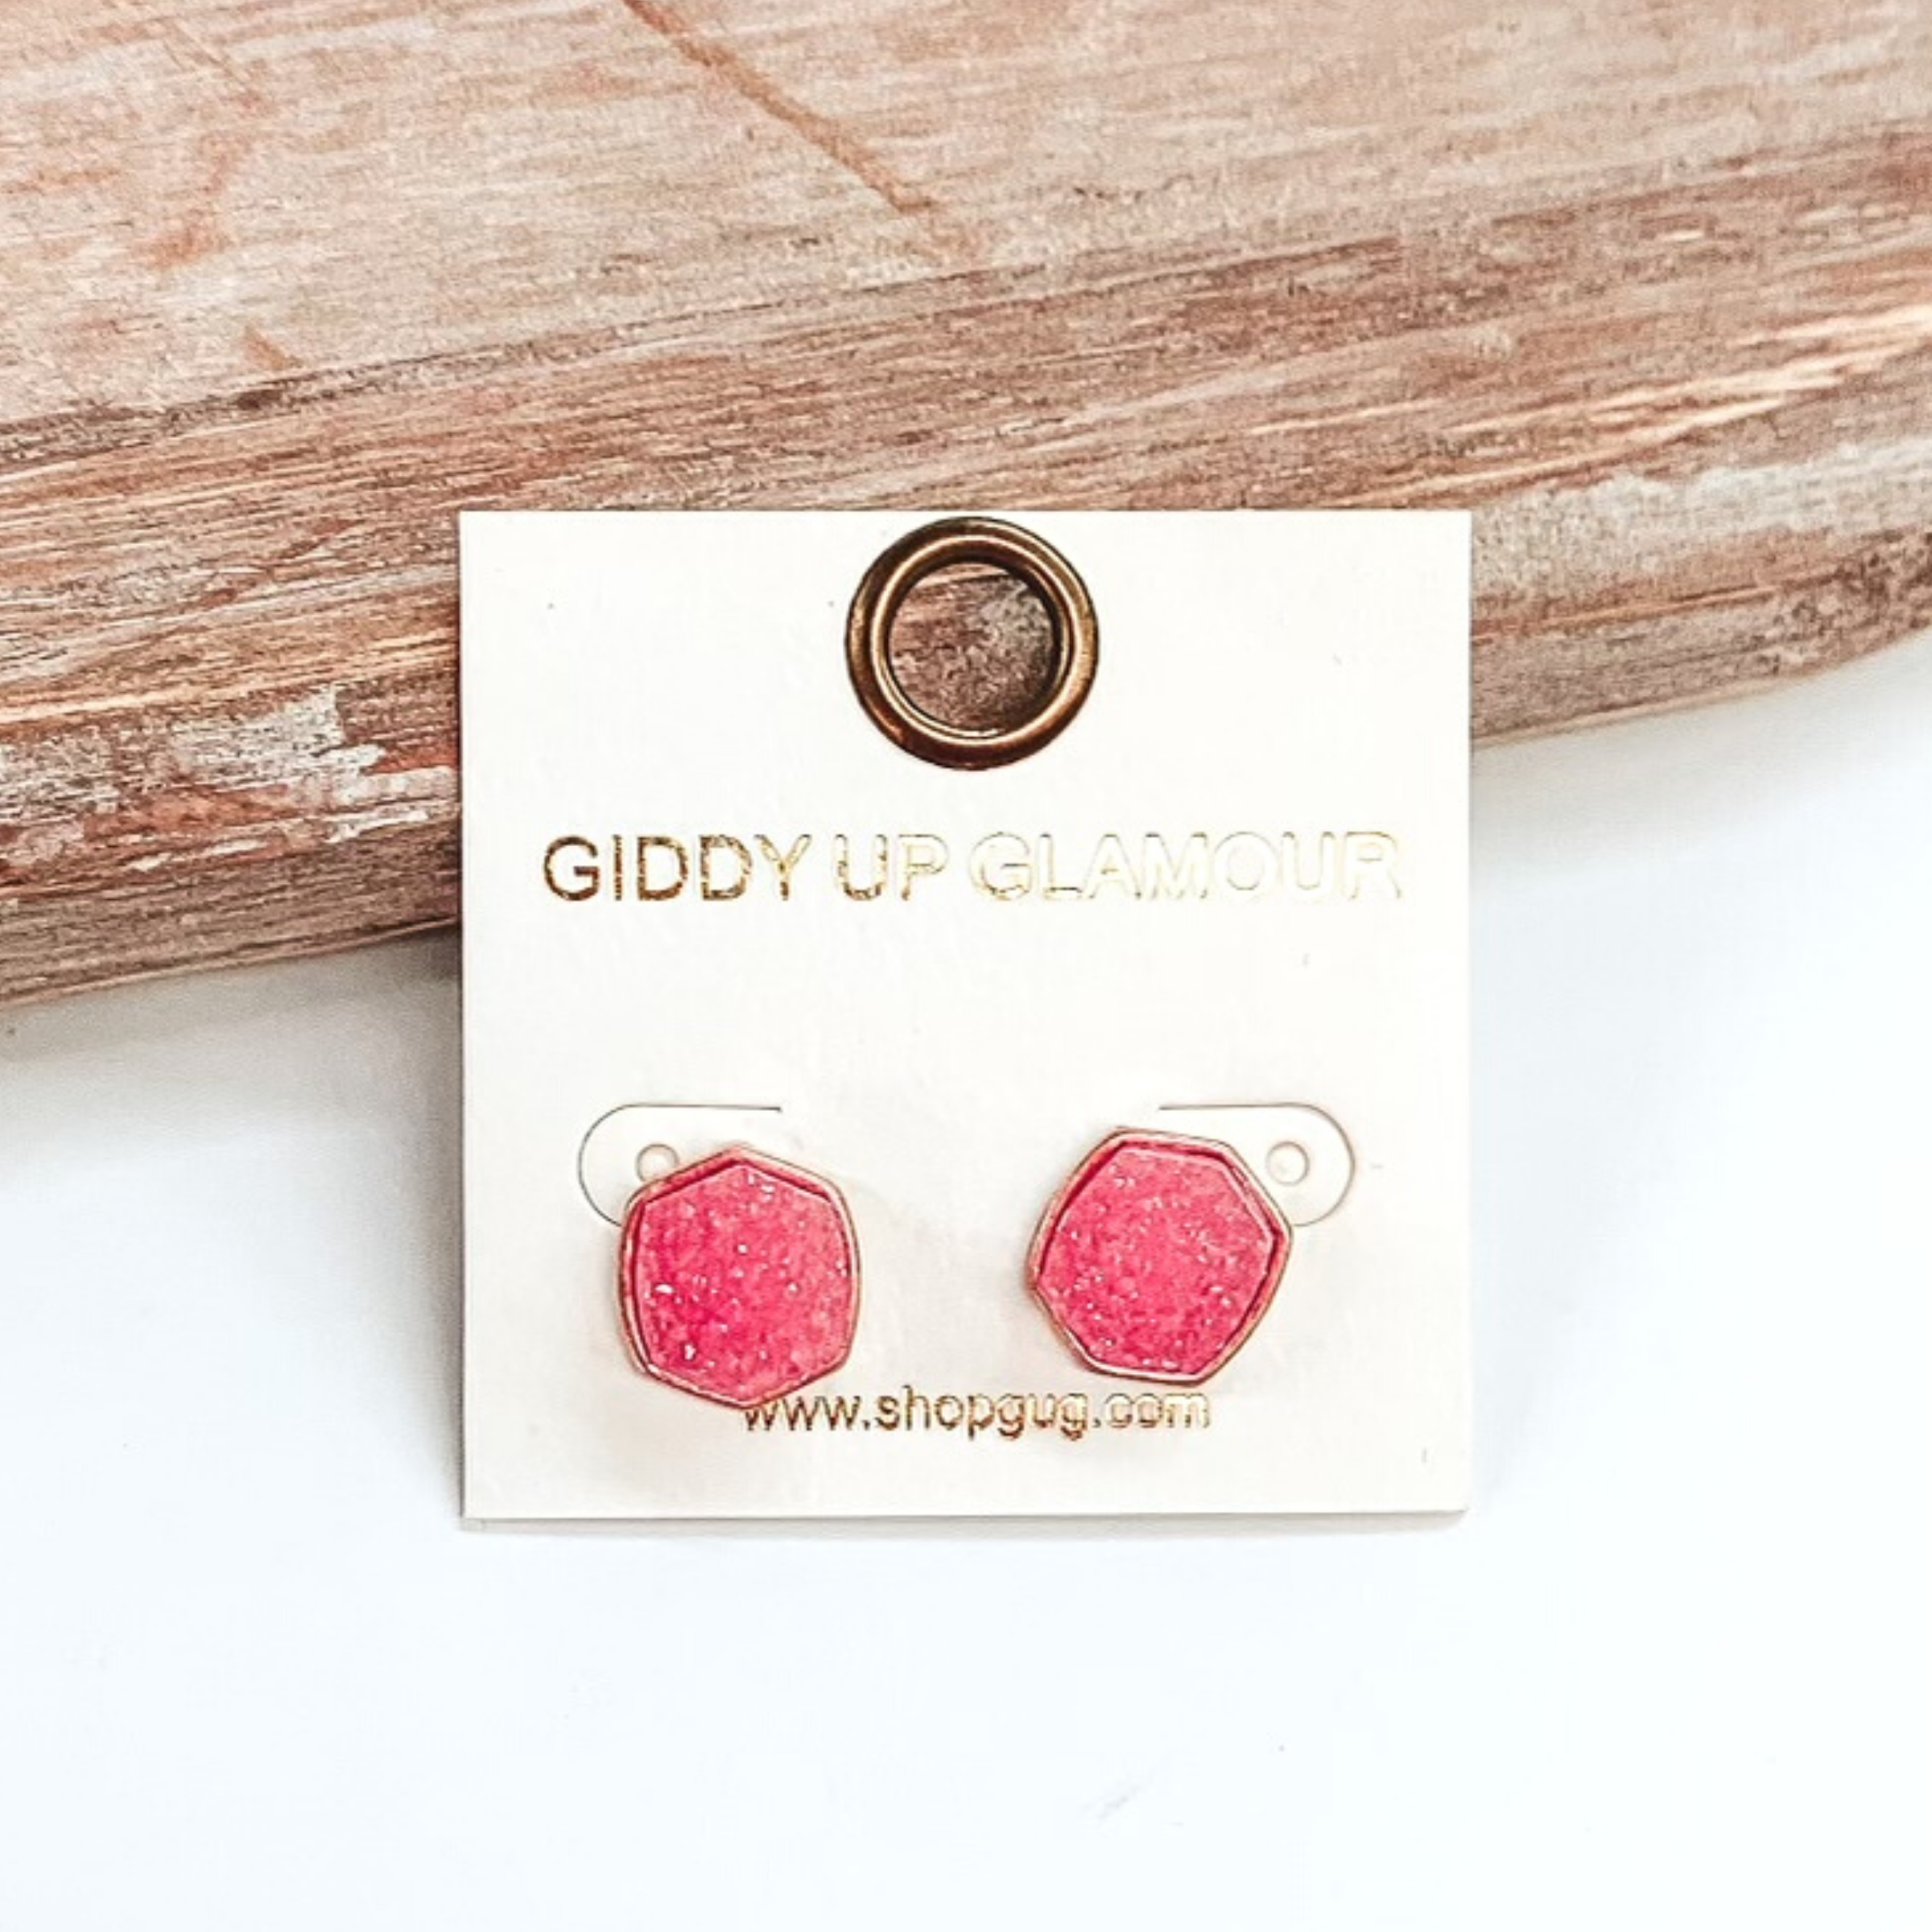 Gold post back earrings with druzy, pink, hexagon shaped stone. These earrings are pictured on a white earrings holder on a white background, leaning against a tan block.